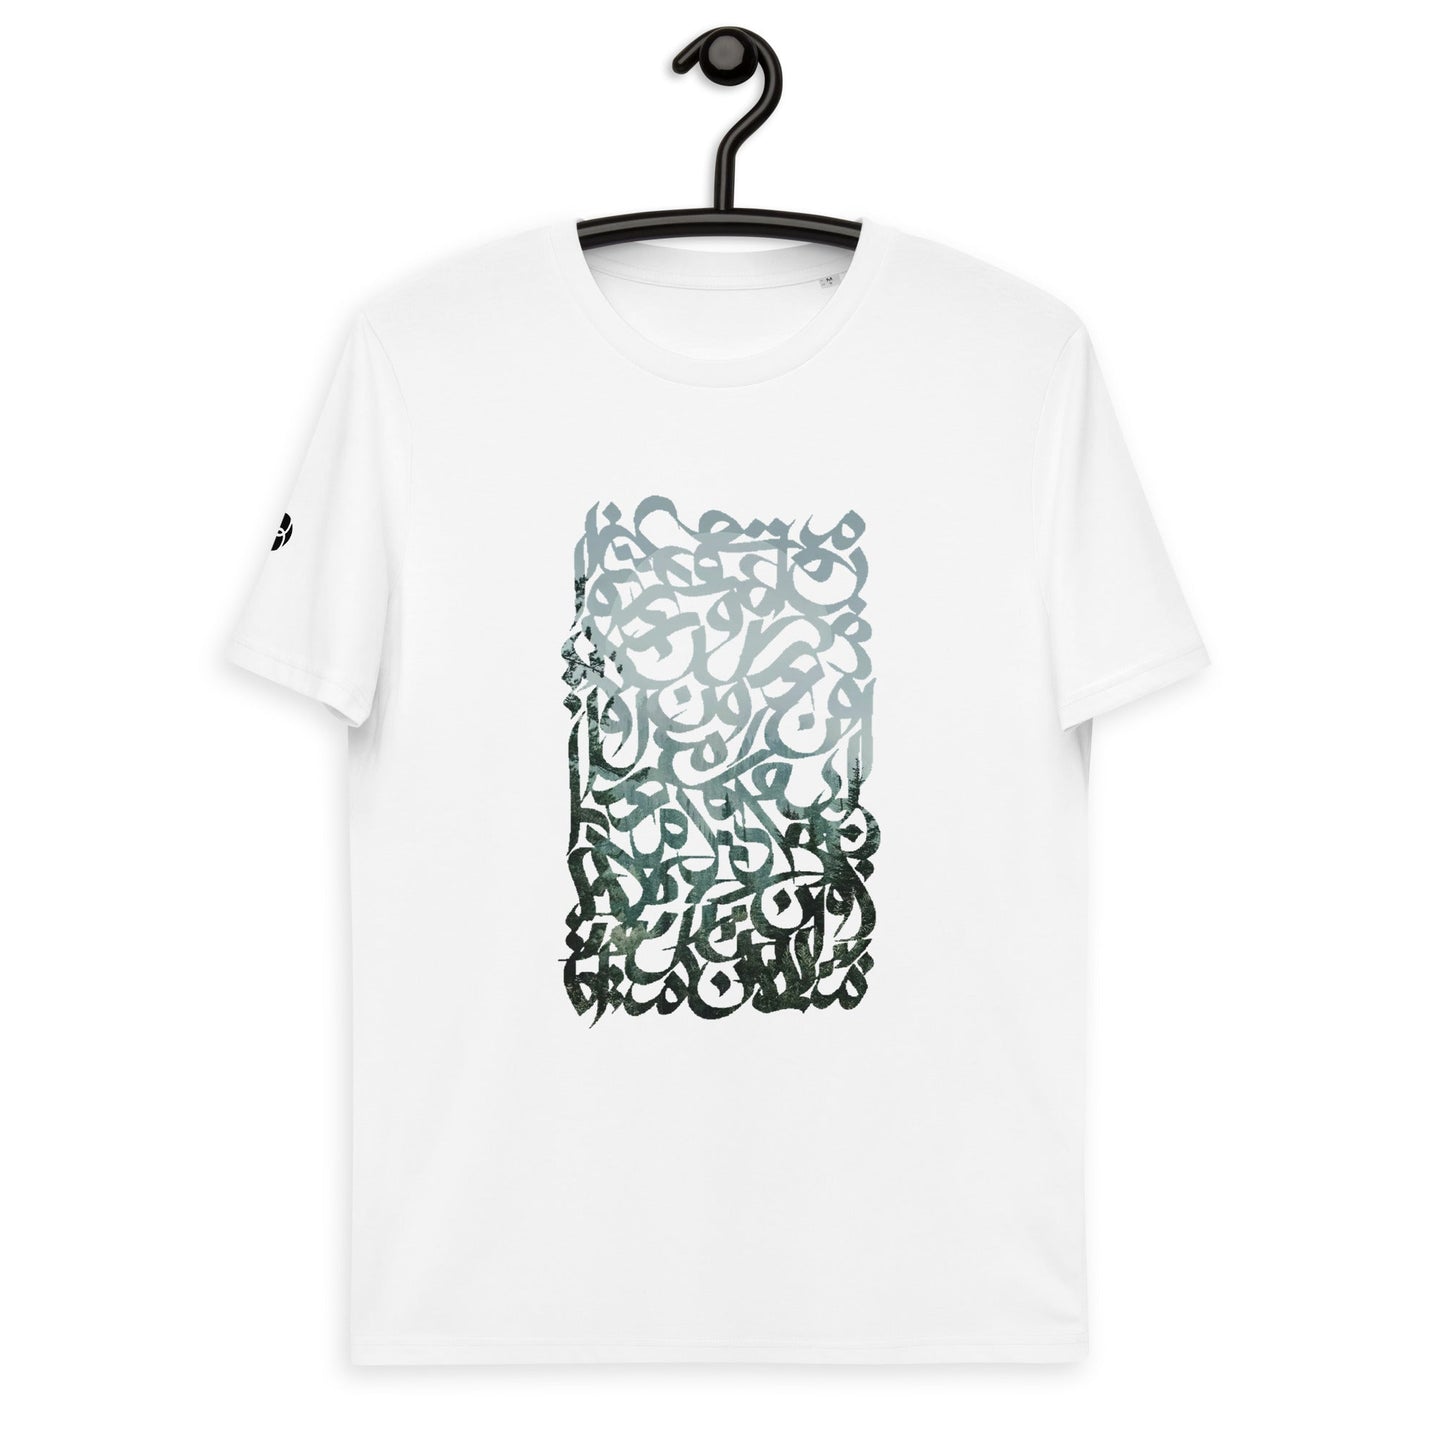 unisex-organic-tshirt-moon-and-forest-white